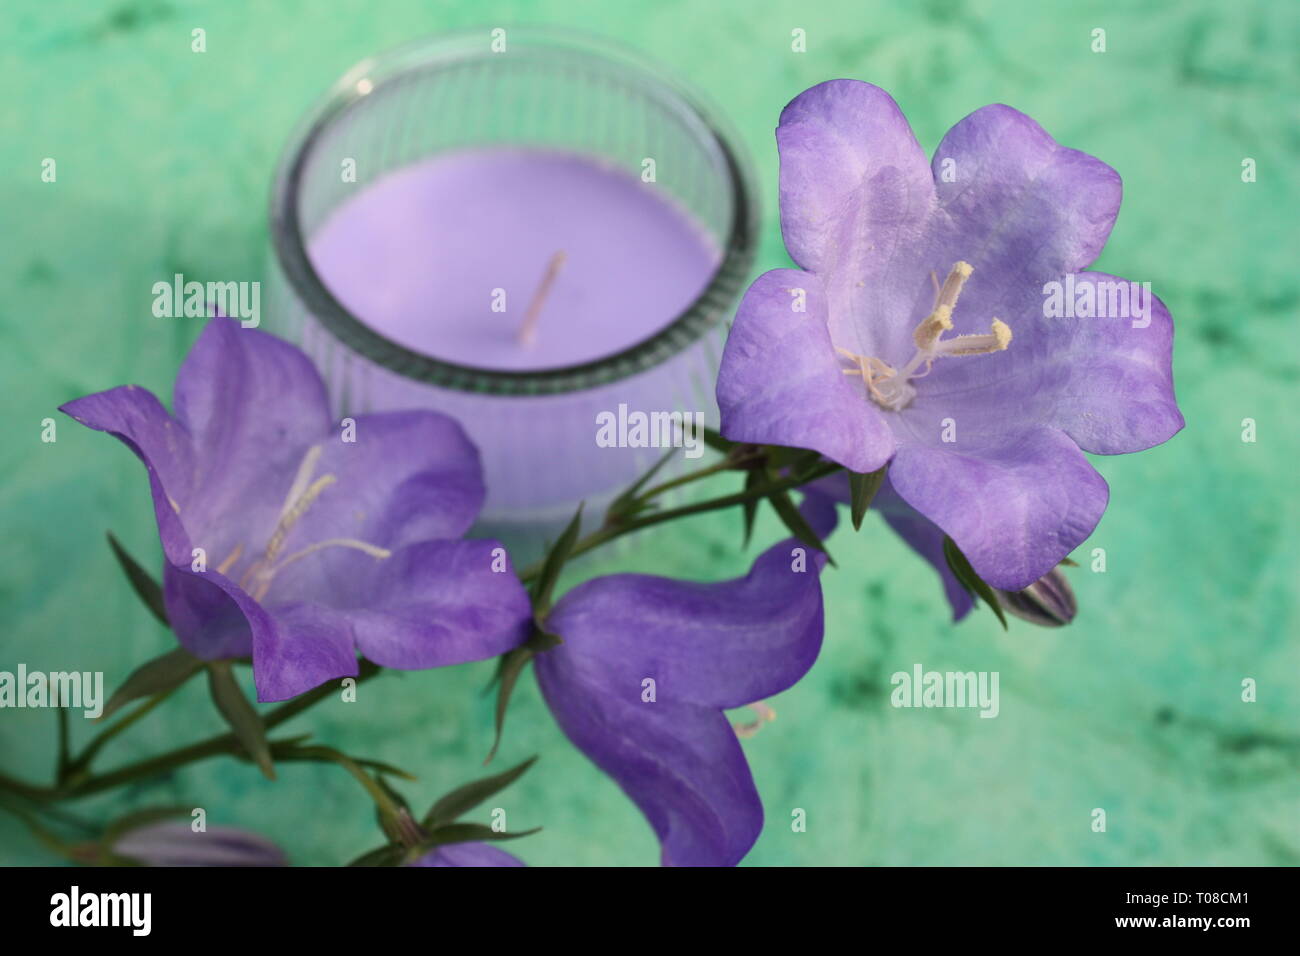 Flowers with candles Stock Photo